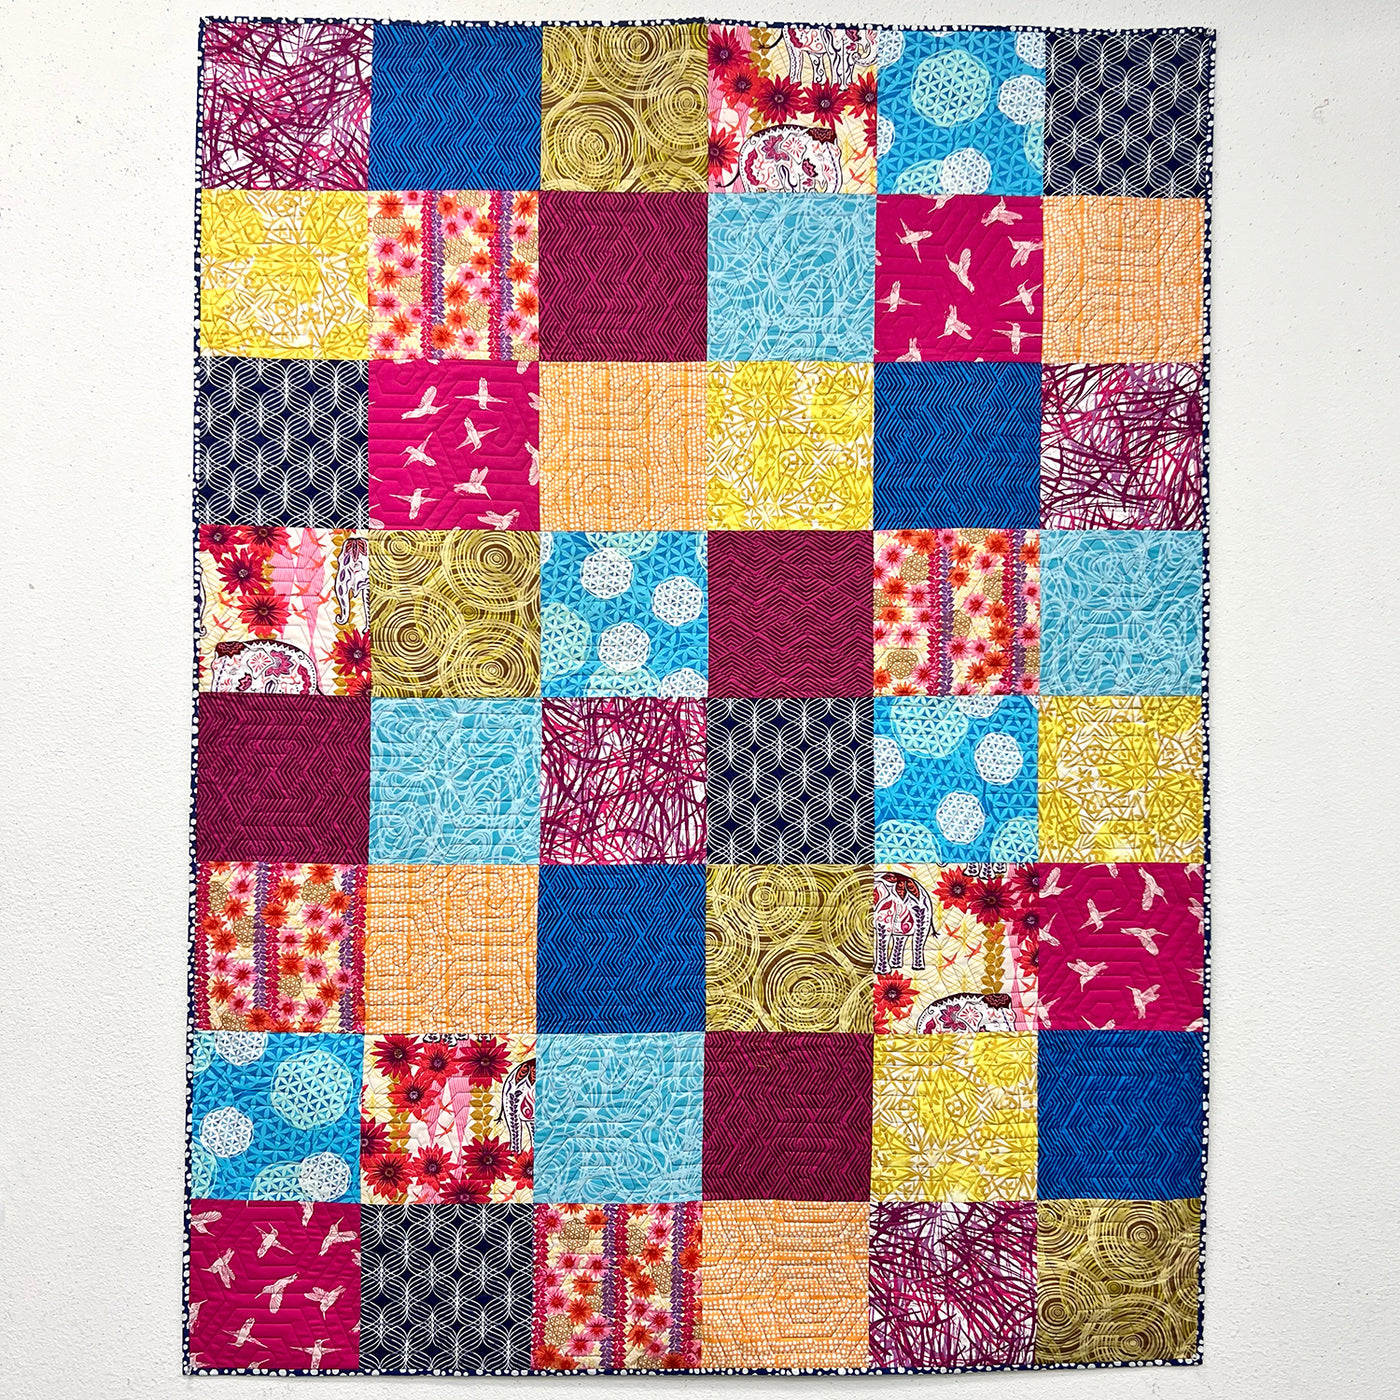 Eclectic Quilt by Valori Wells